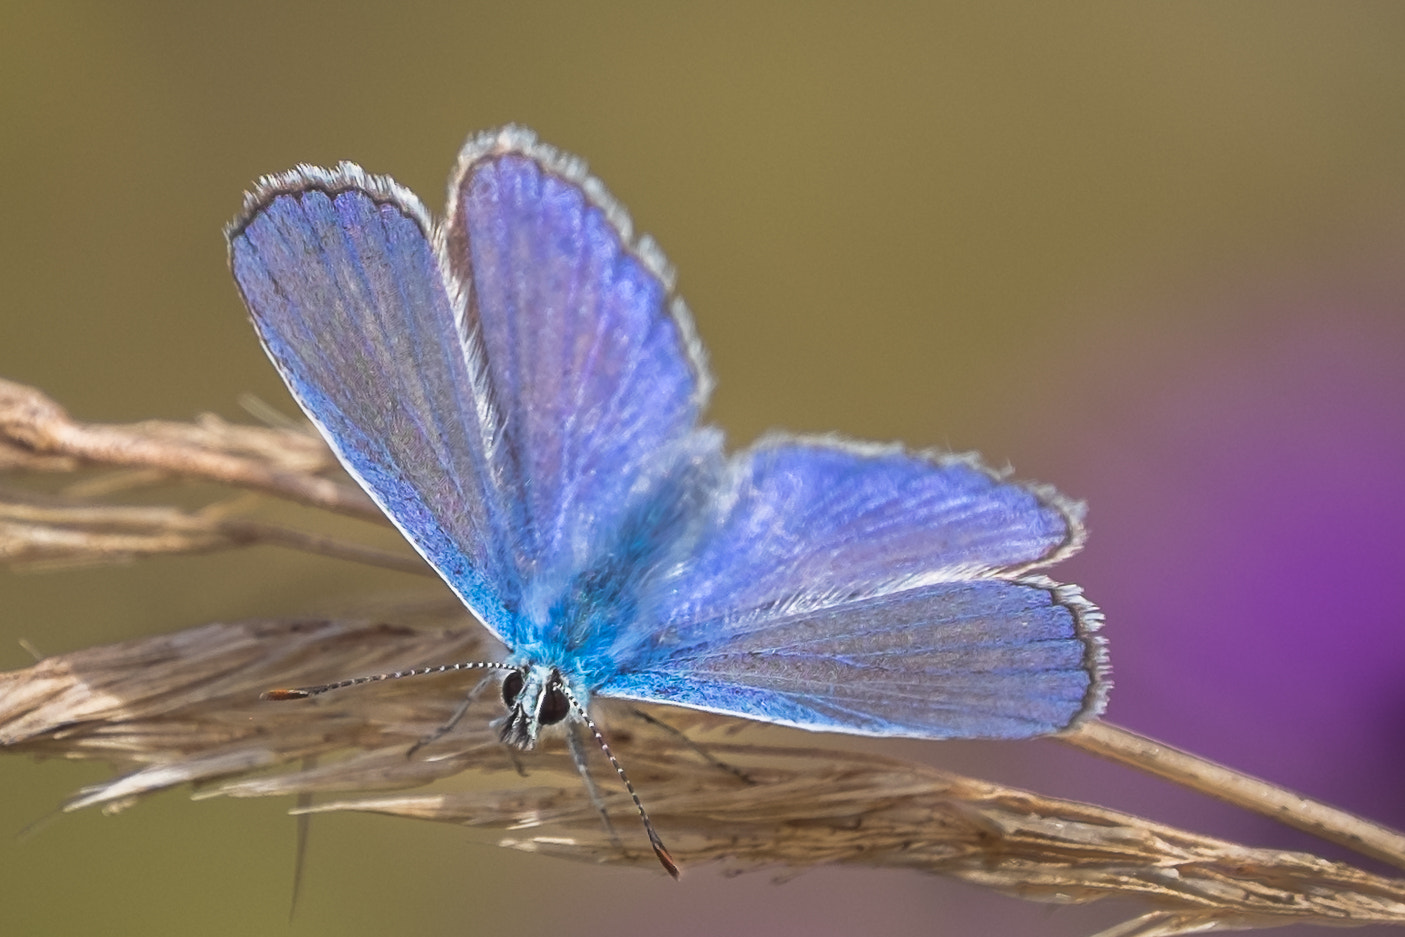 Fujifilm X-T1 sample photo. The blue butterfly photography